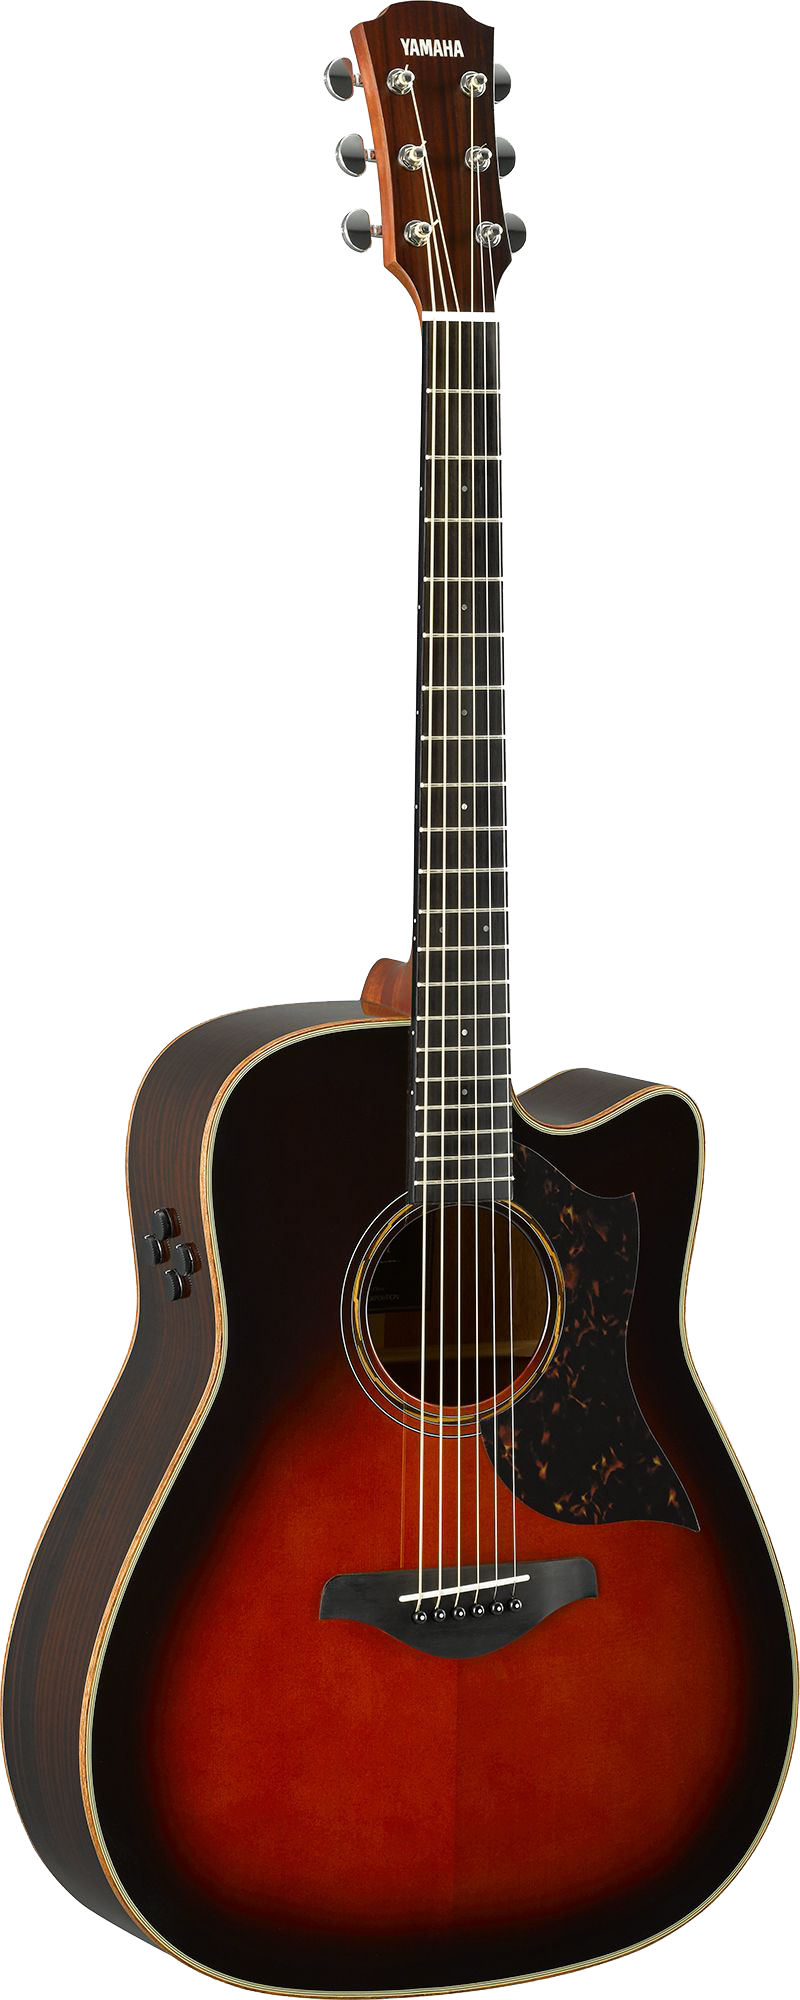 Full front angle of Yamaha A3R ARE Tobacco Brown Sunburst.